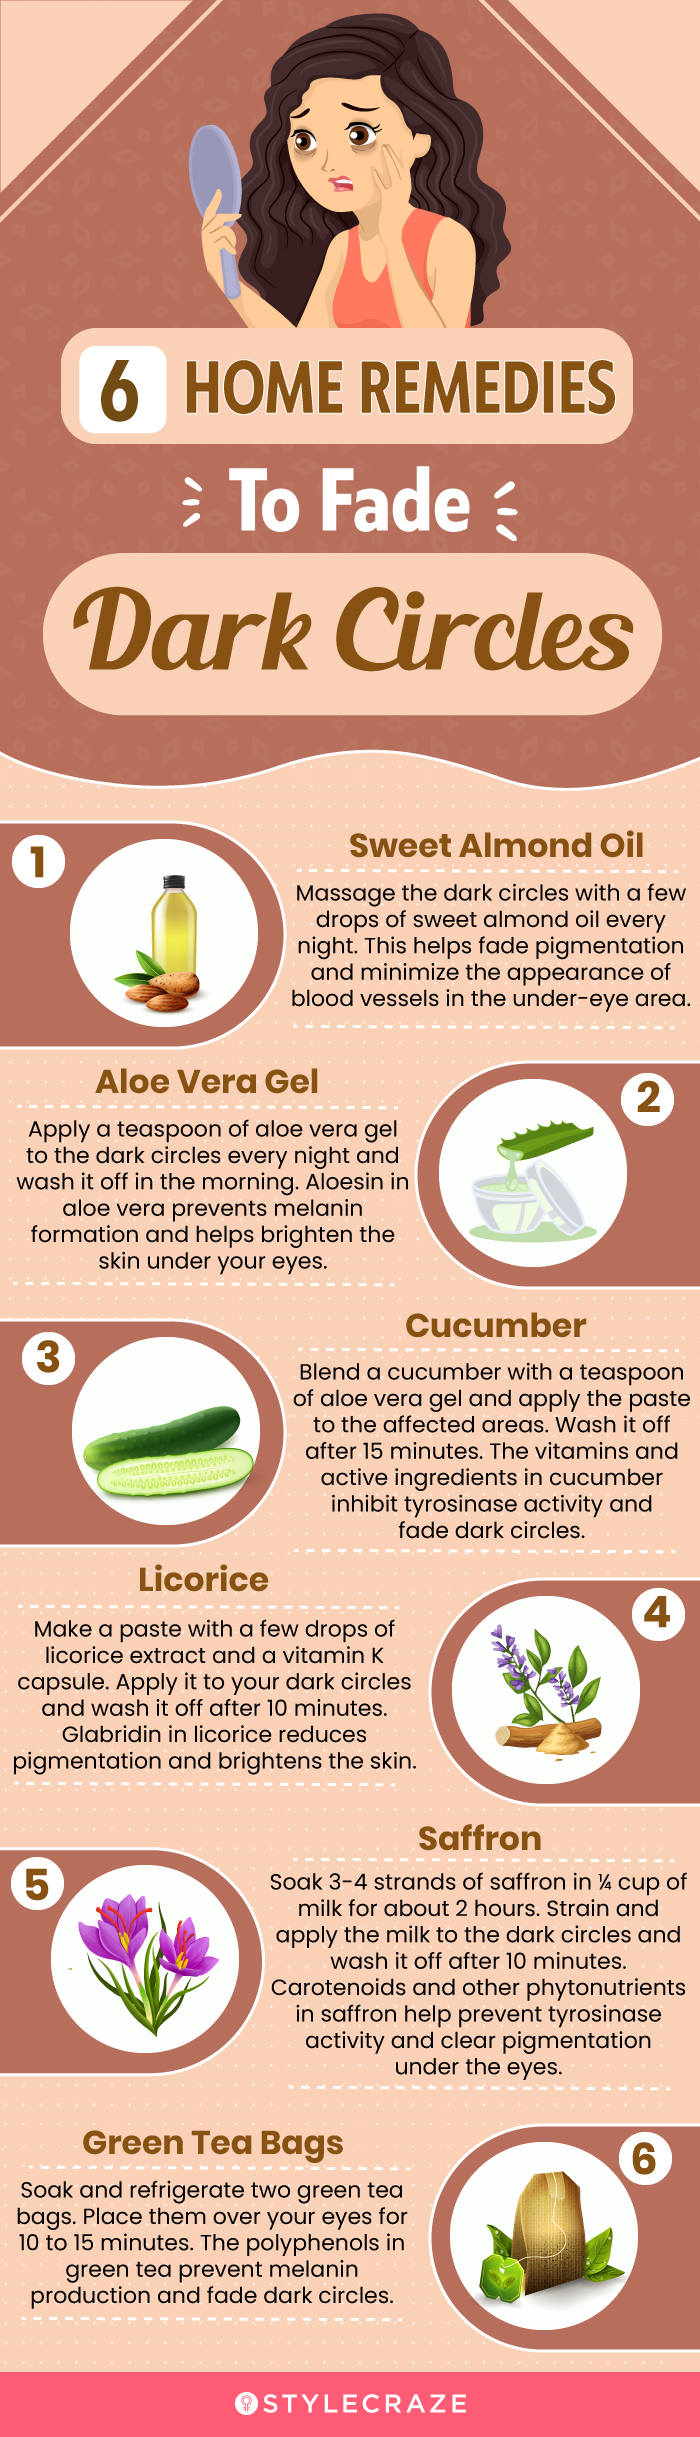 6 home remedies to fade under eye dark circles (infographic)